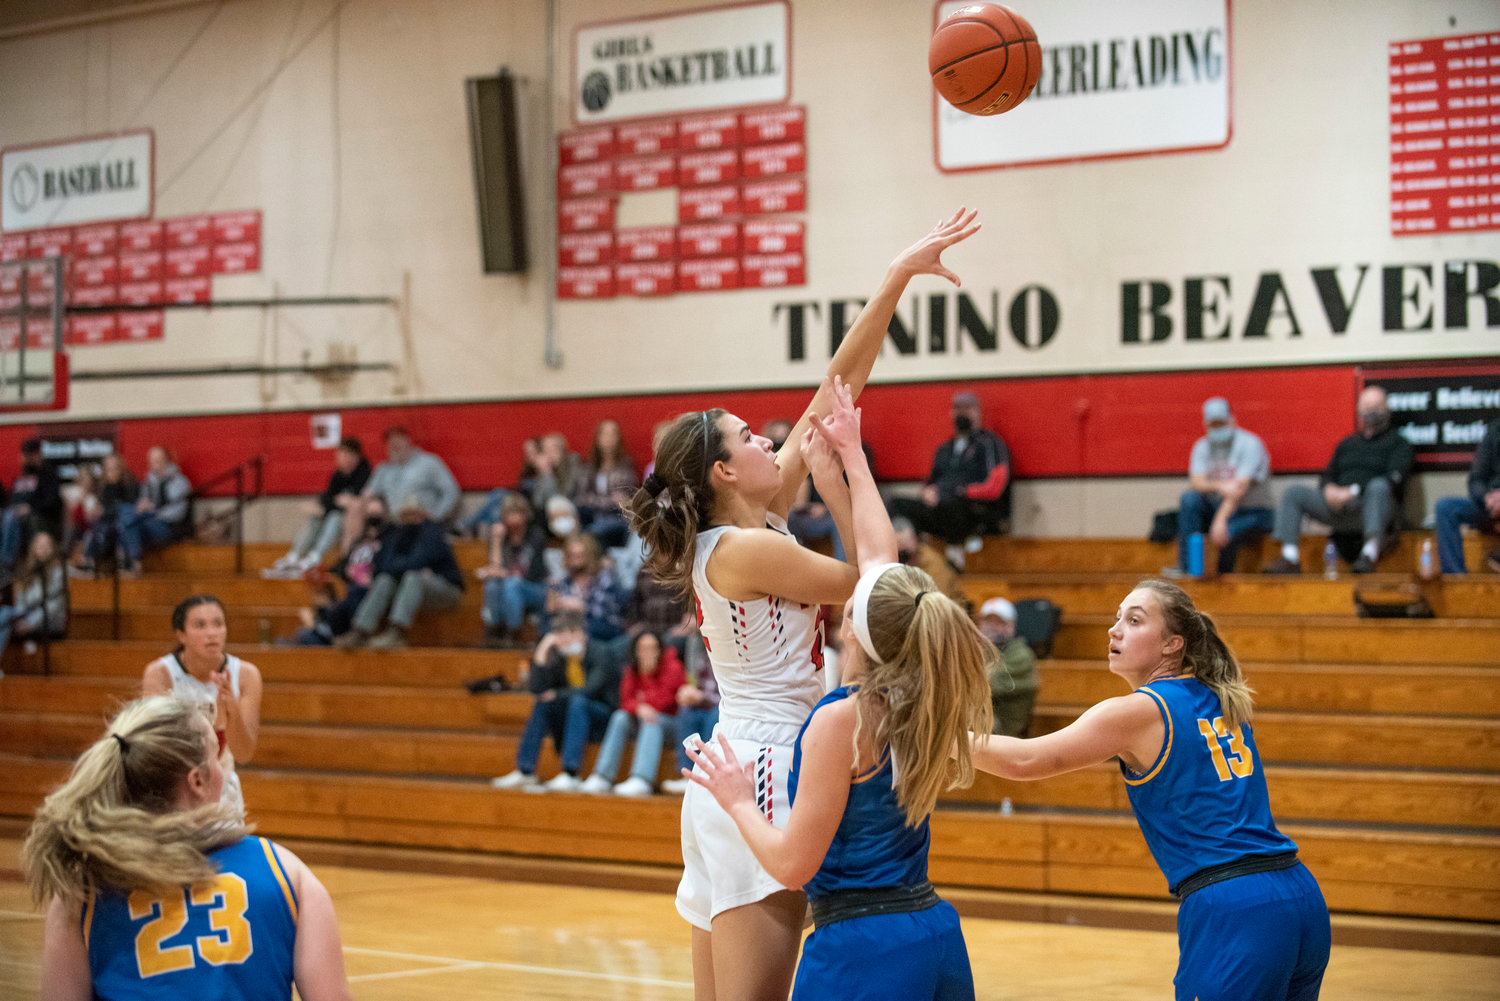 Tenino's Ashley Schow throws up an inside shot against Adna on Dec. 14.